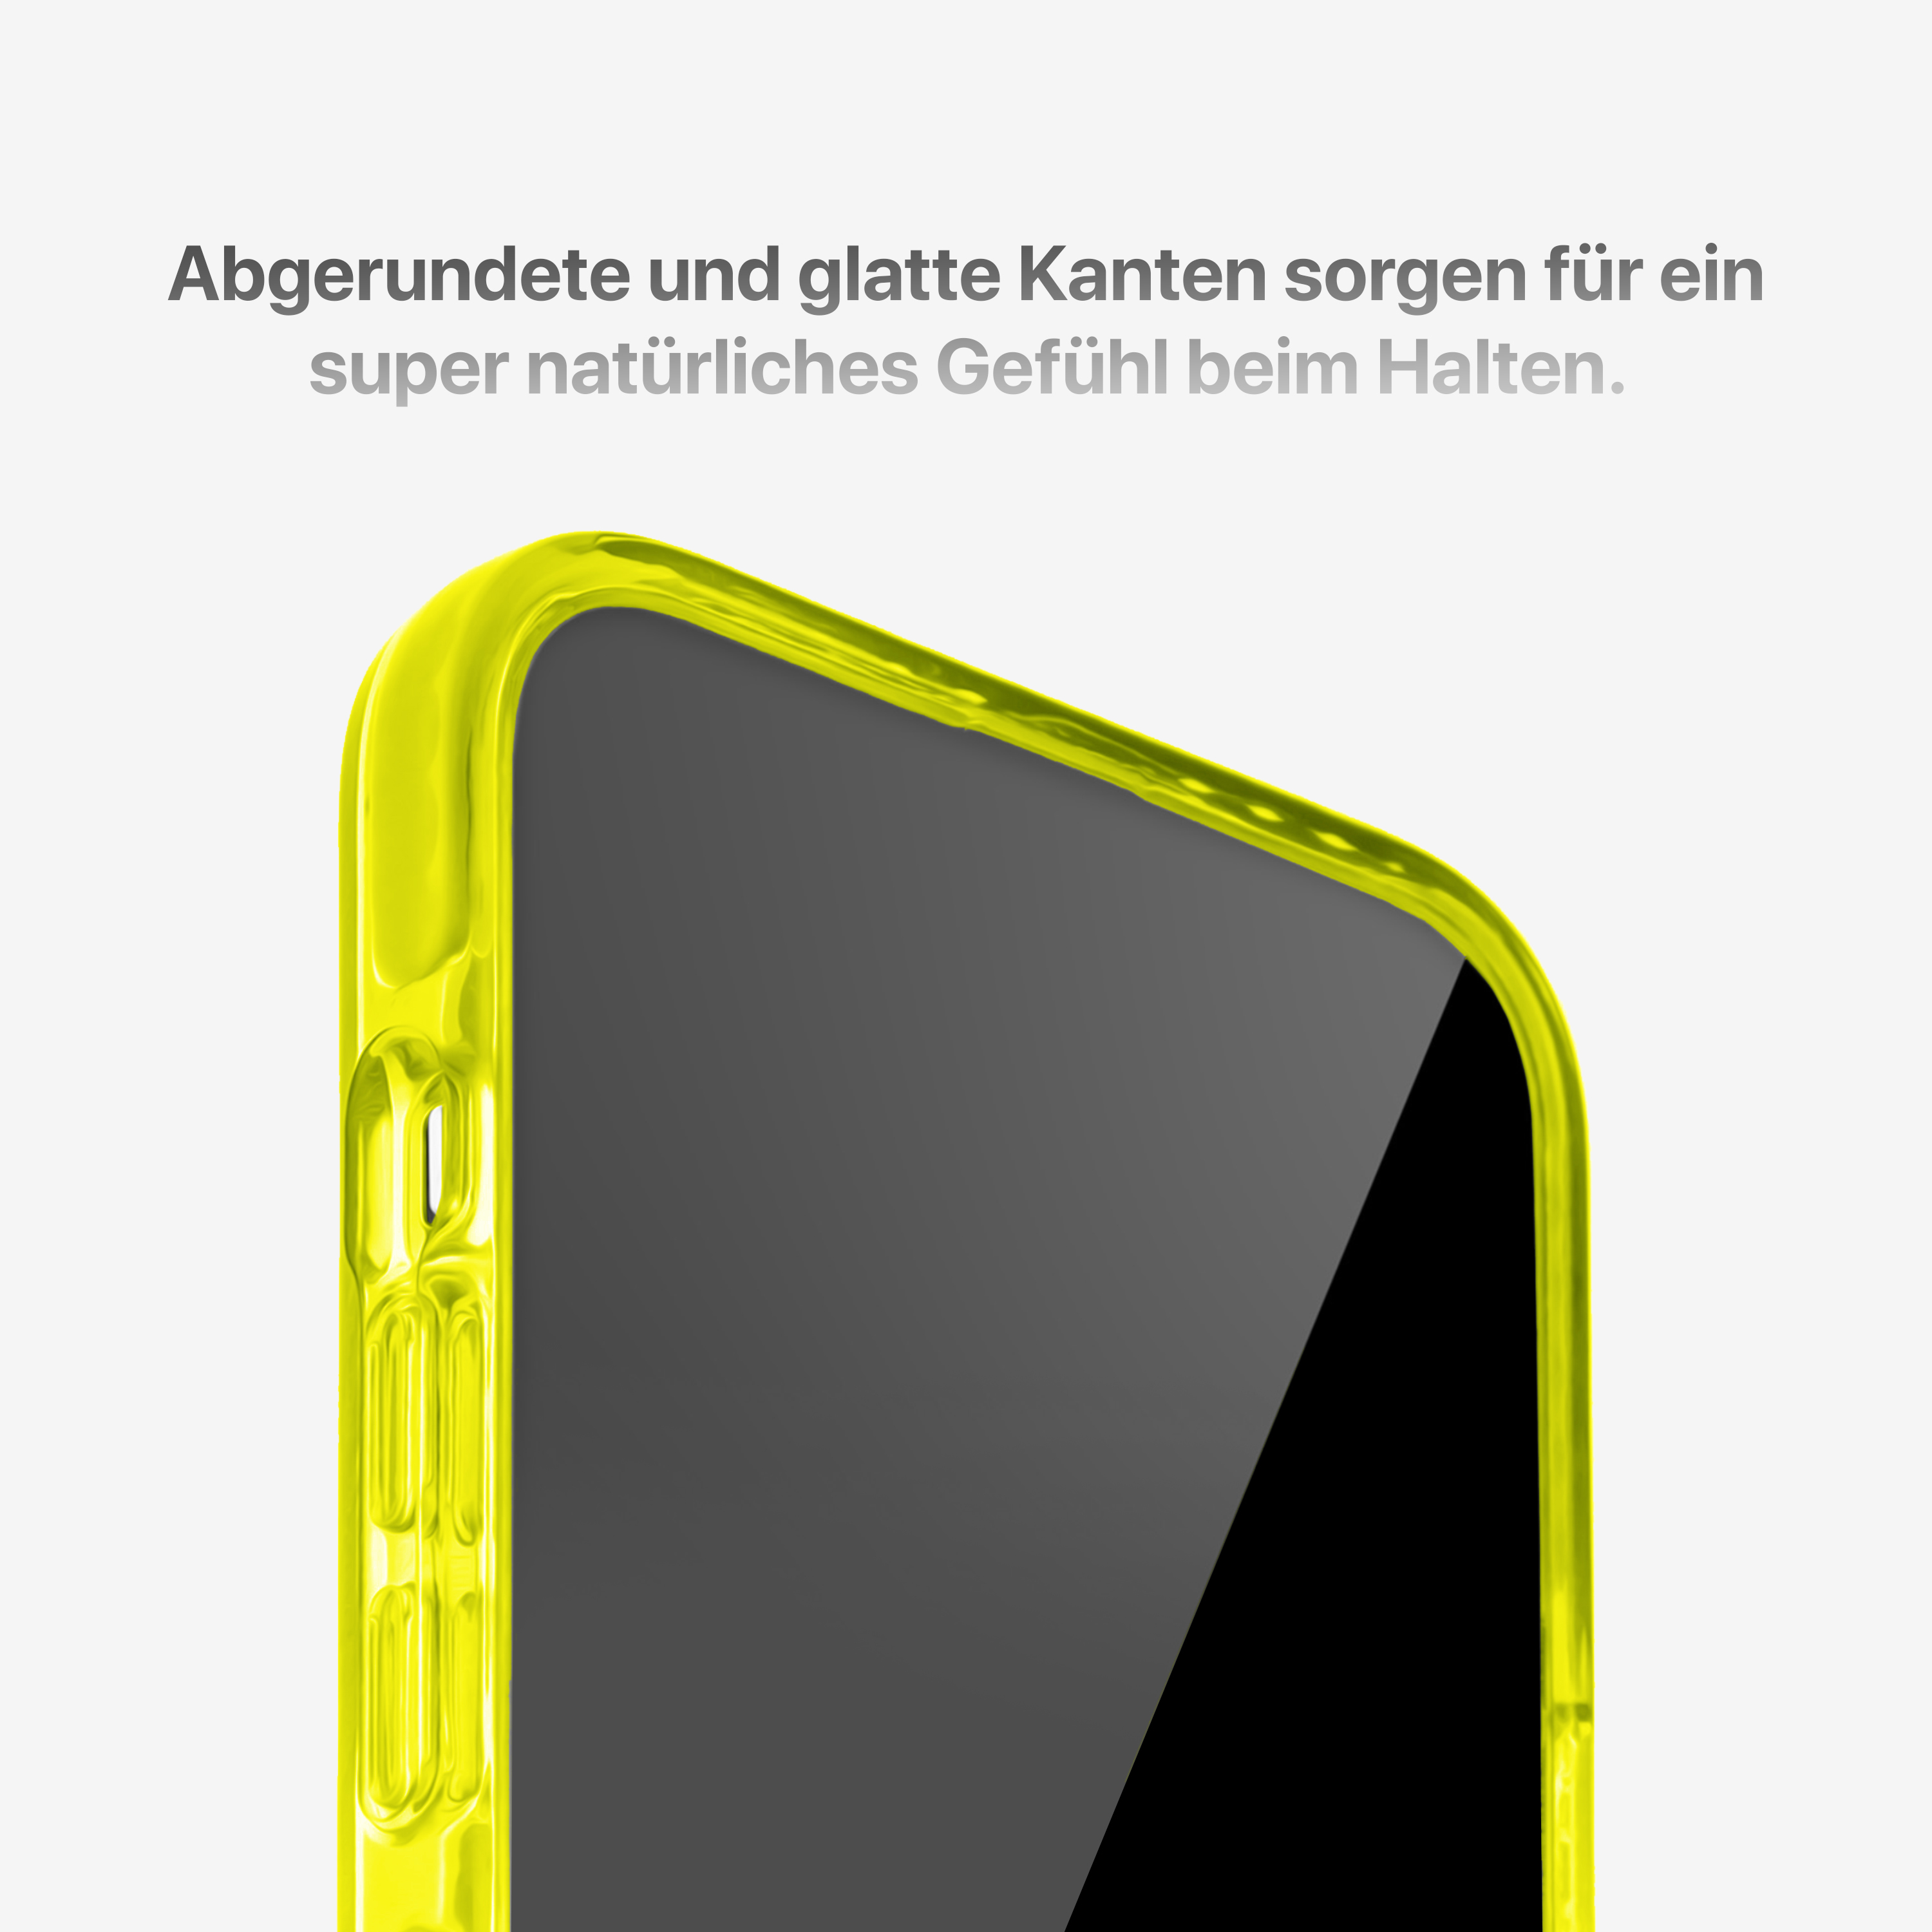 ROLE 14 Apple, MODEL Pro Cyberyellow Cybercase, iPhone Backcover, Max,